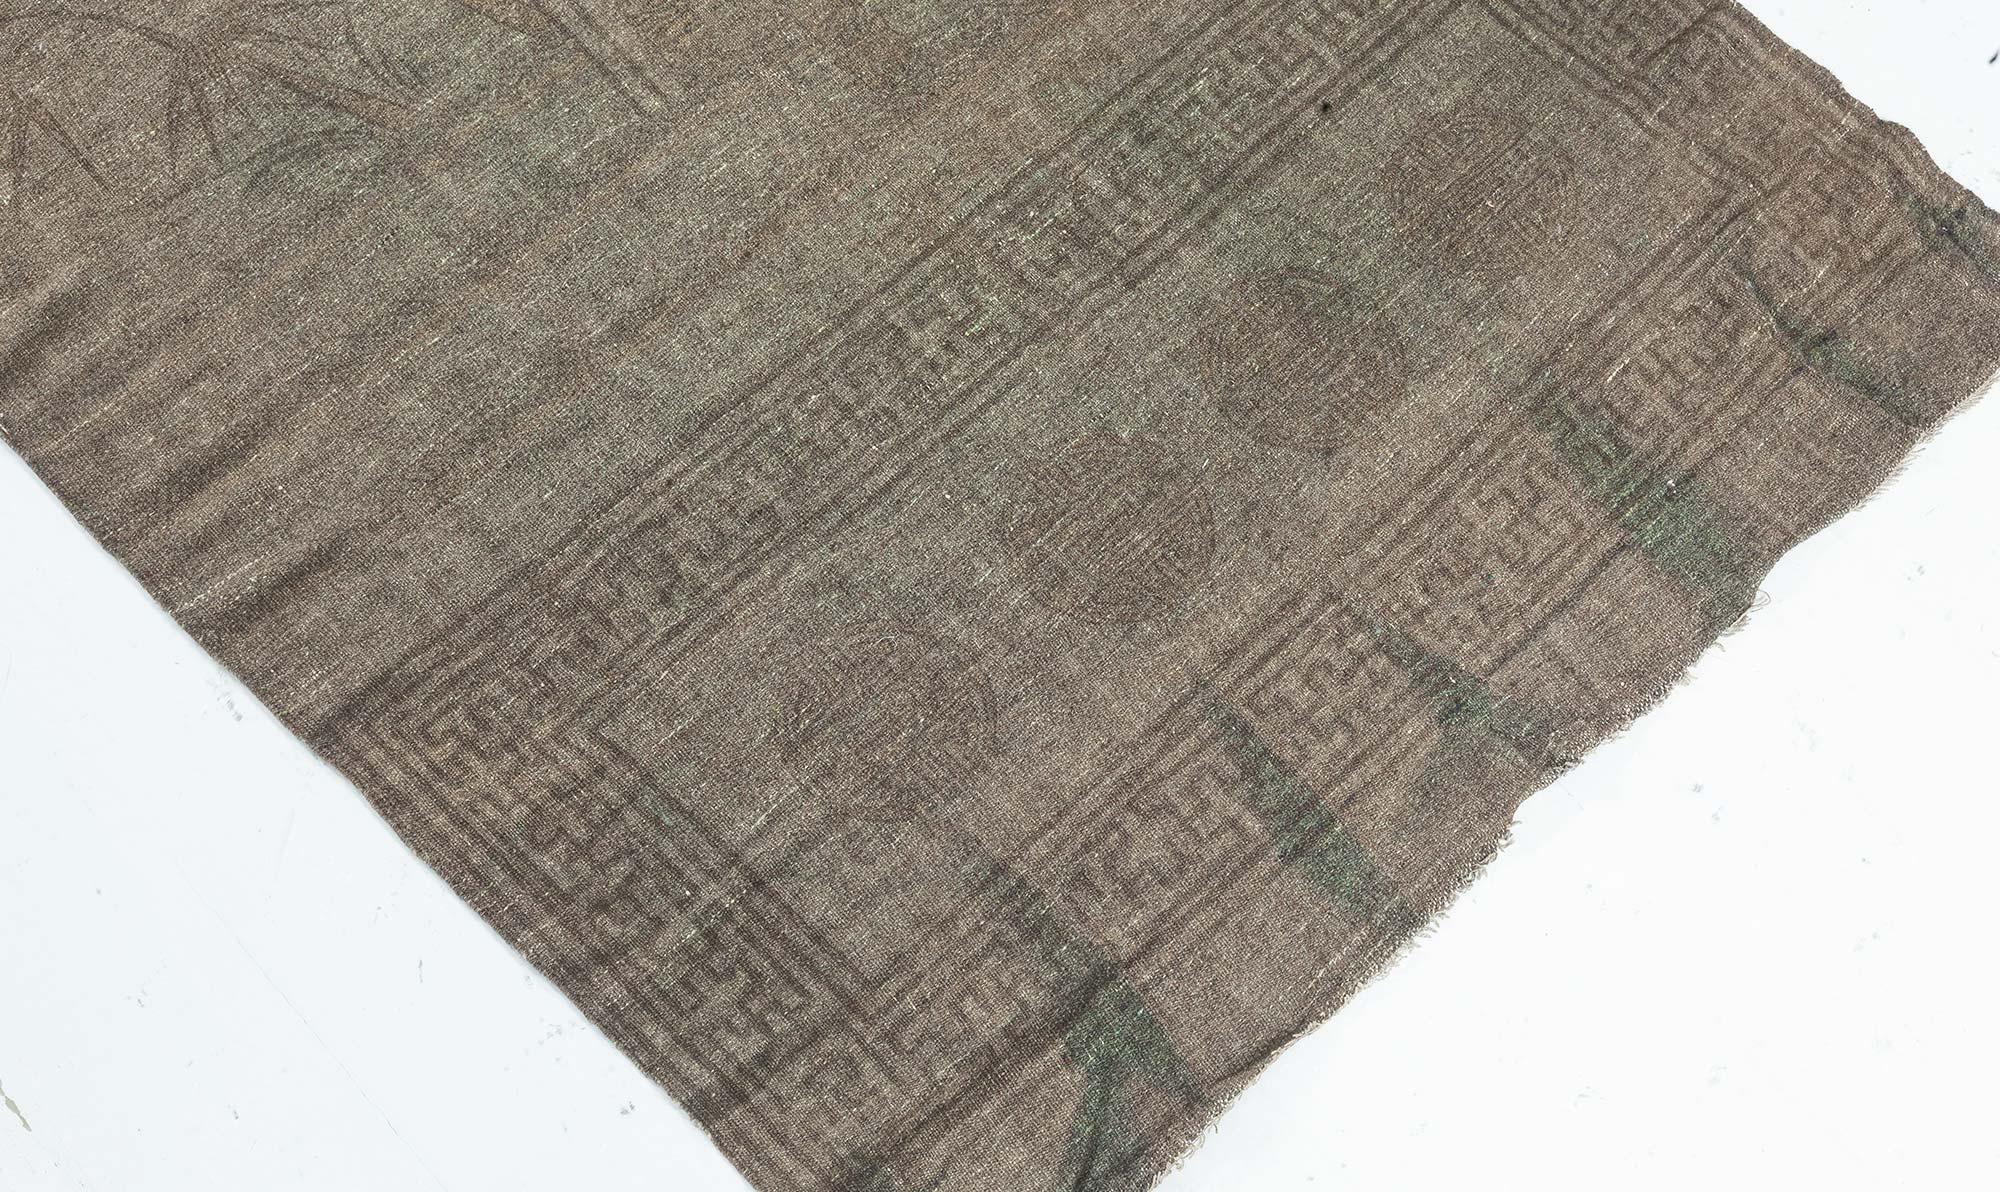 Antique Kilim Bamboo Green Brown Runner In Good Condition For Sale In New York, NY